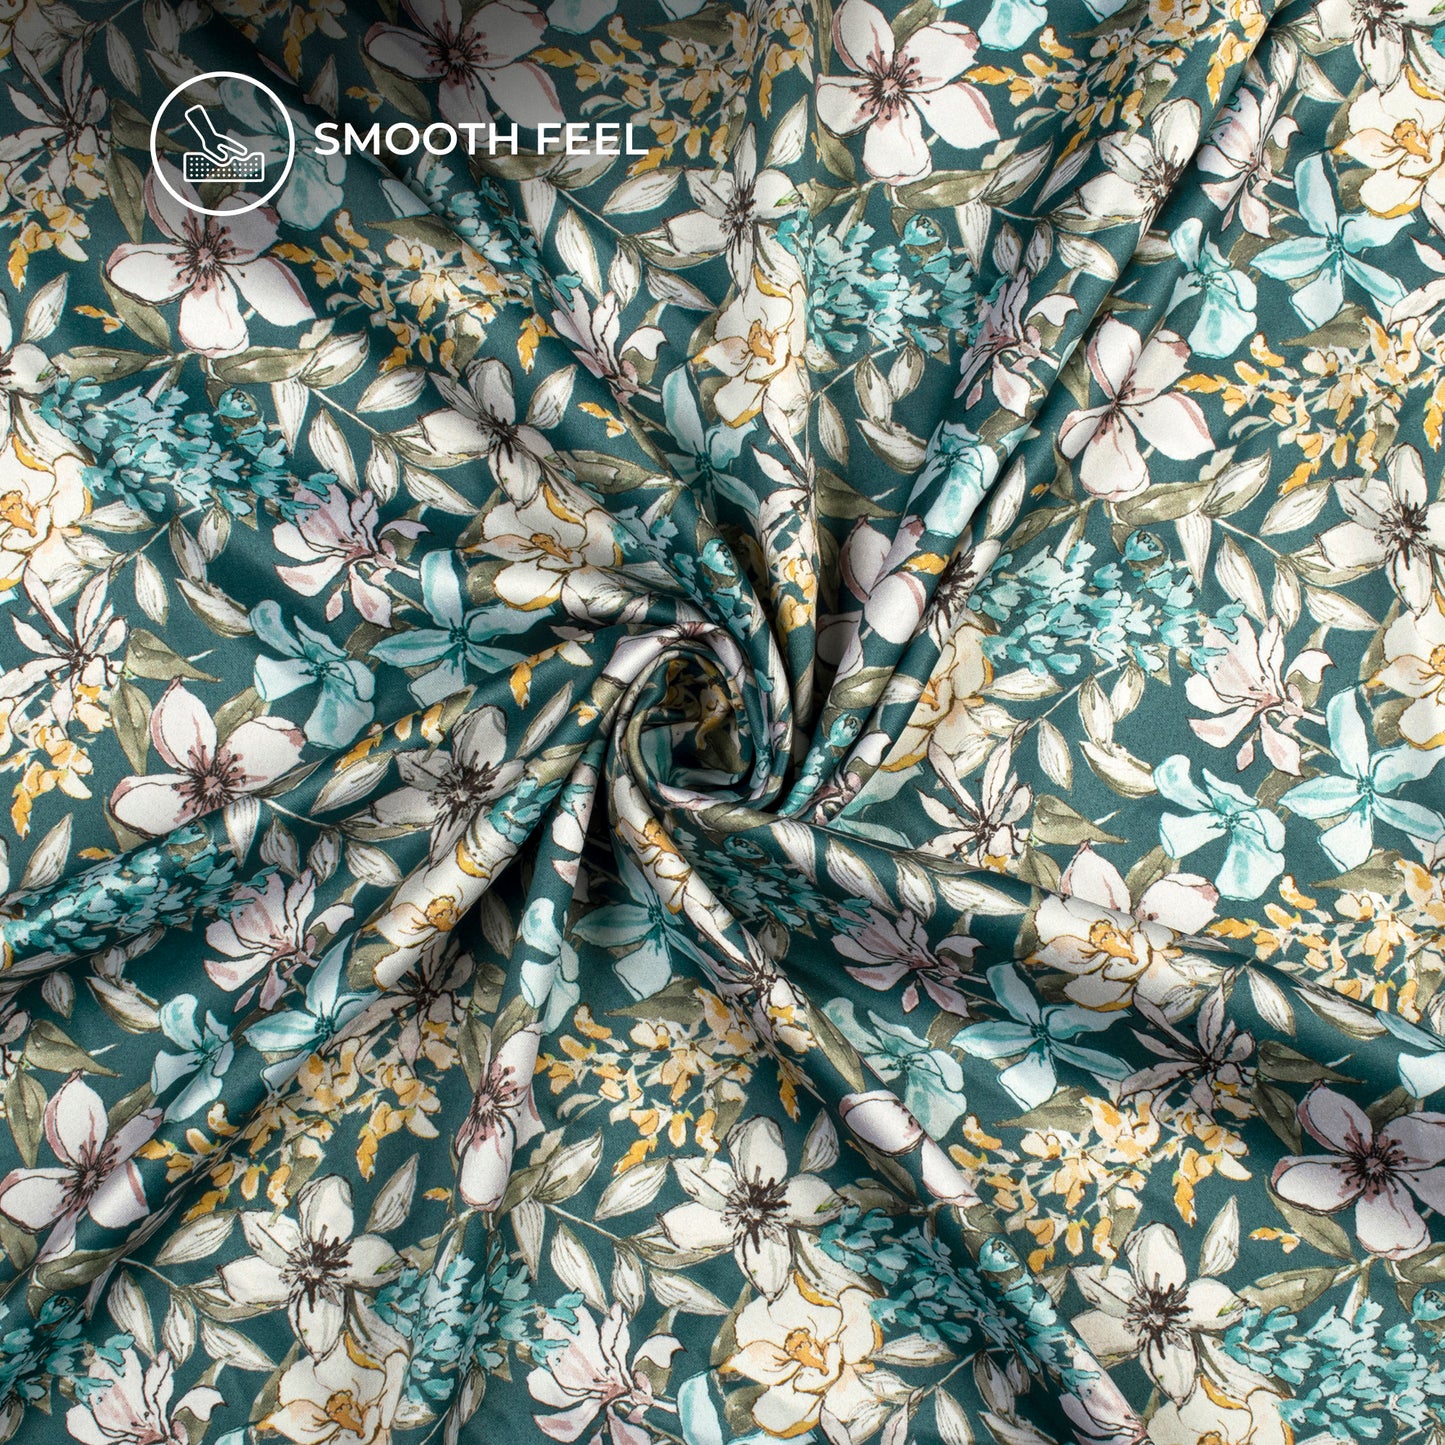 Teal Blue And Beige Floral Digital Print Charmeuse Satin Fabric (Width 58 Inches)